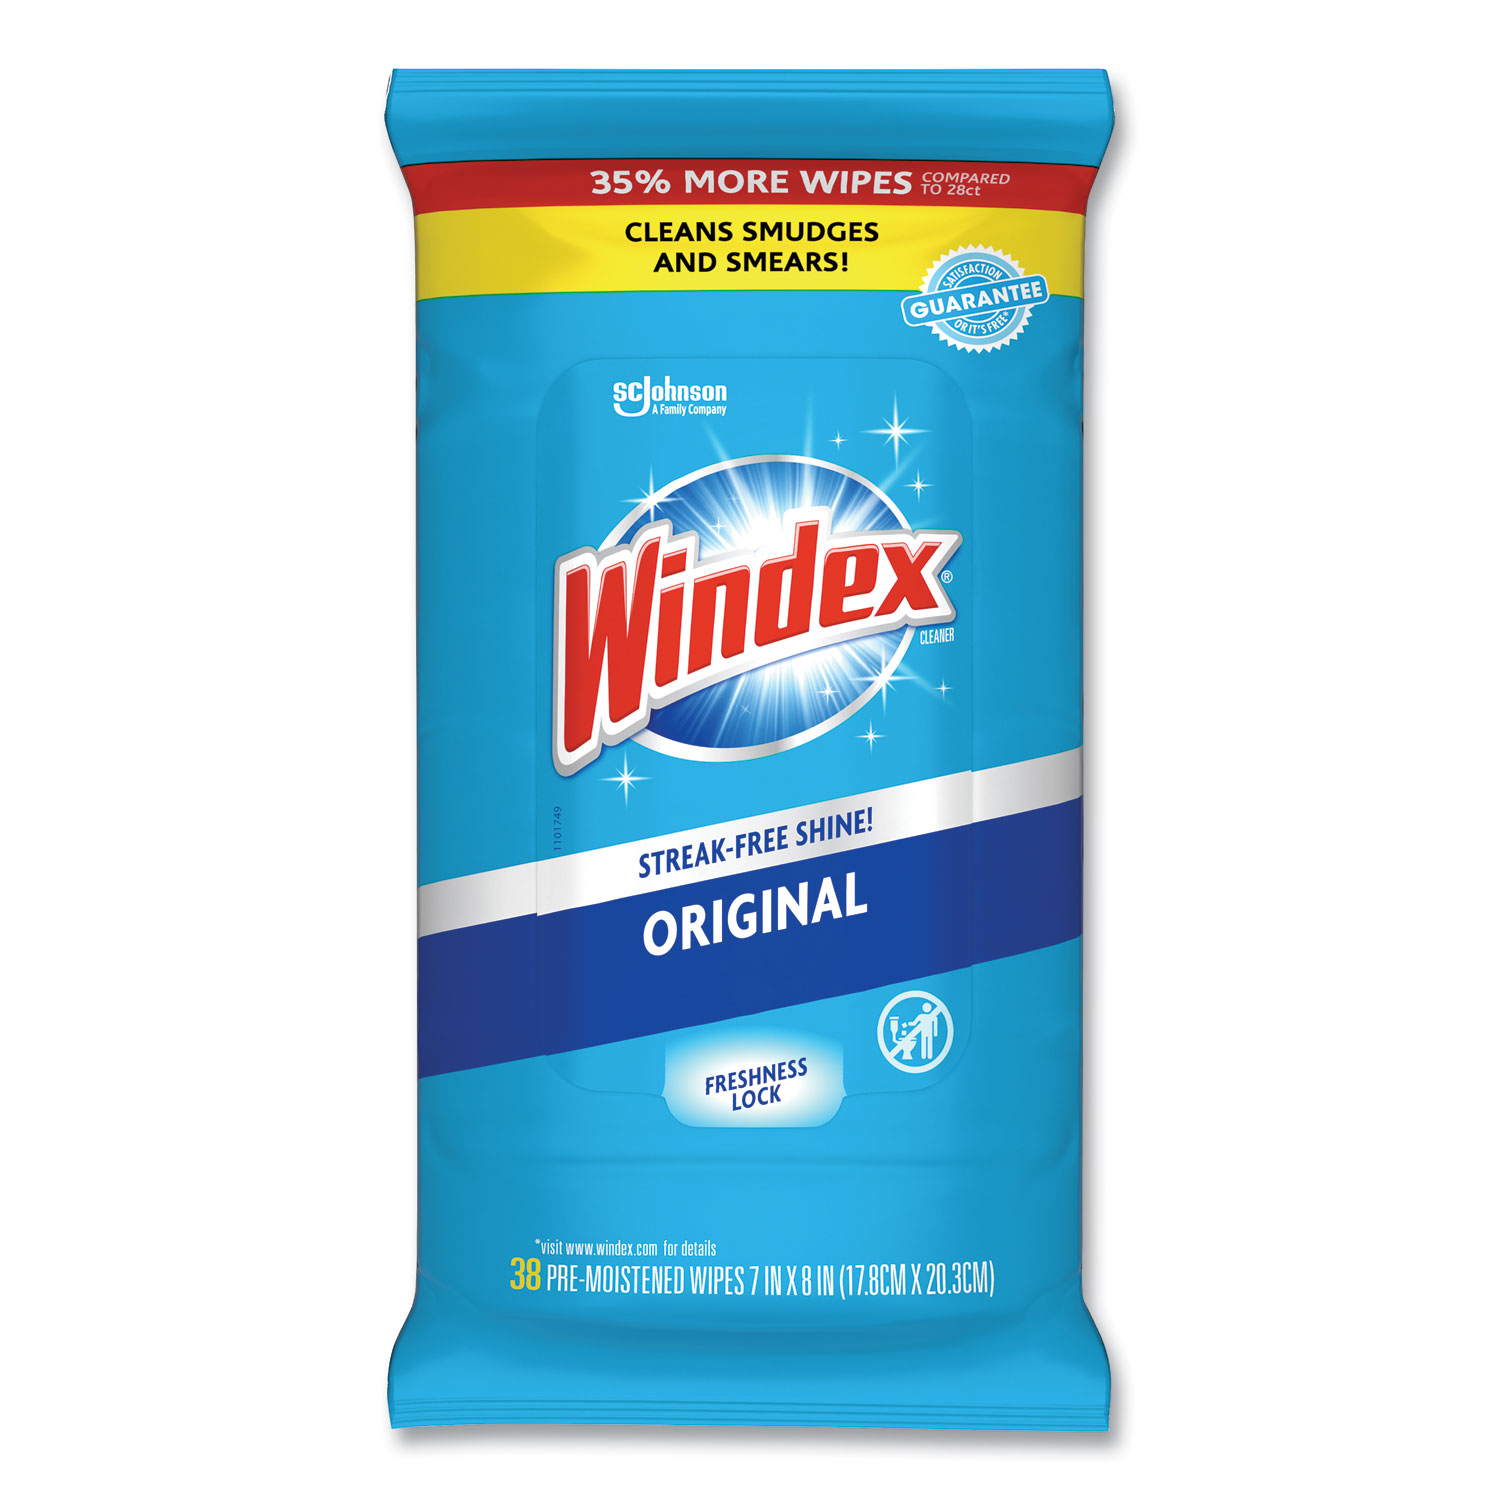  Windex 00019800002961 Glass and Surface Wet Wipe, Cloth, 7 x 8, 38/Pack, 12 Packs/Carton (SJN319251) 